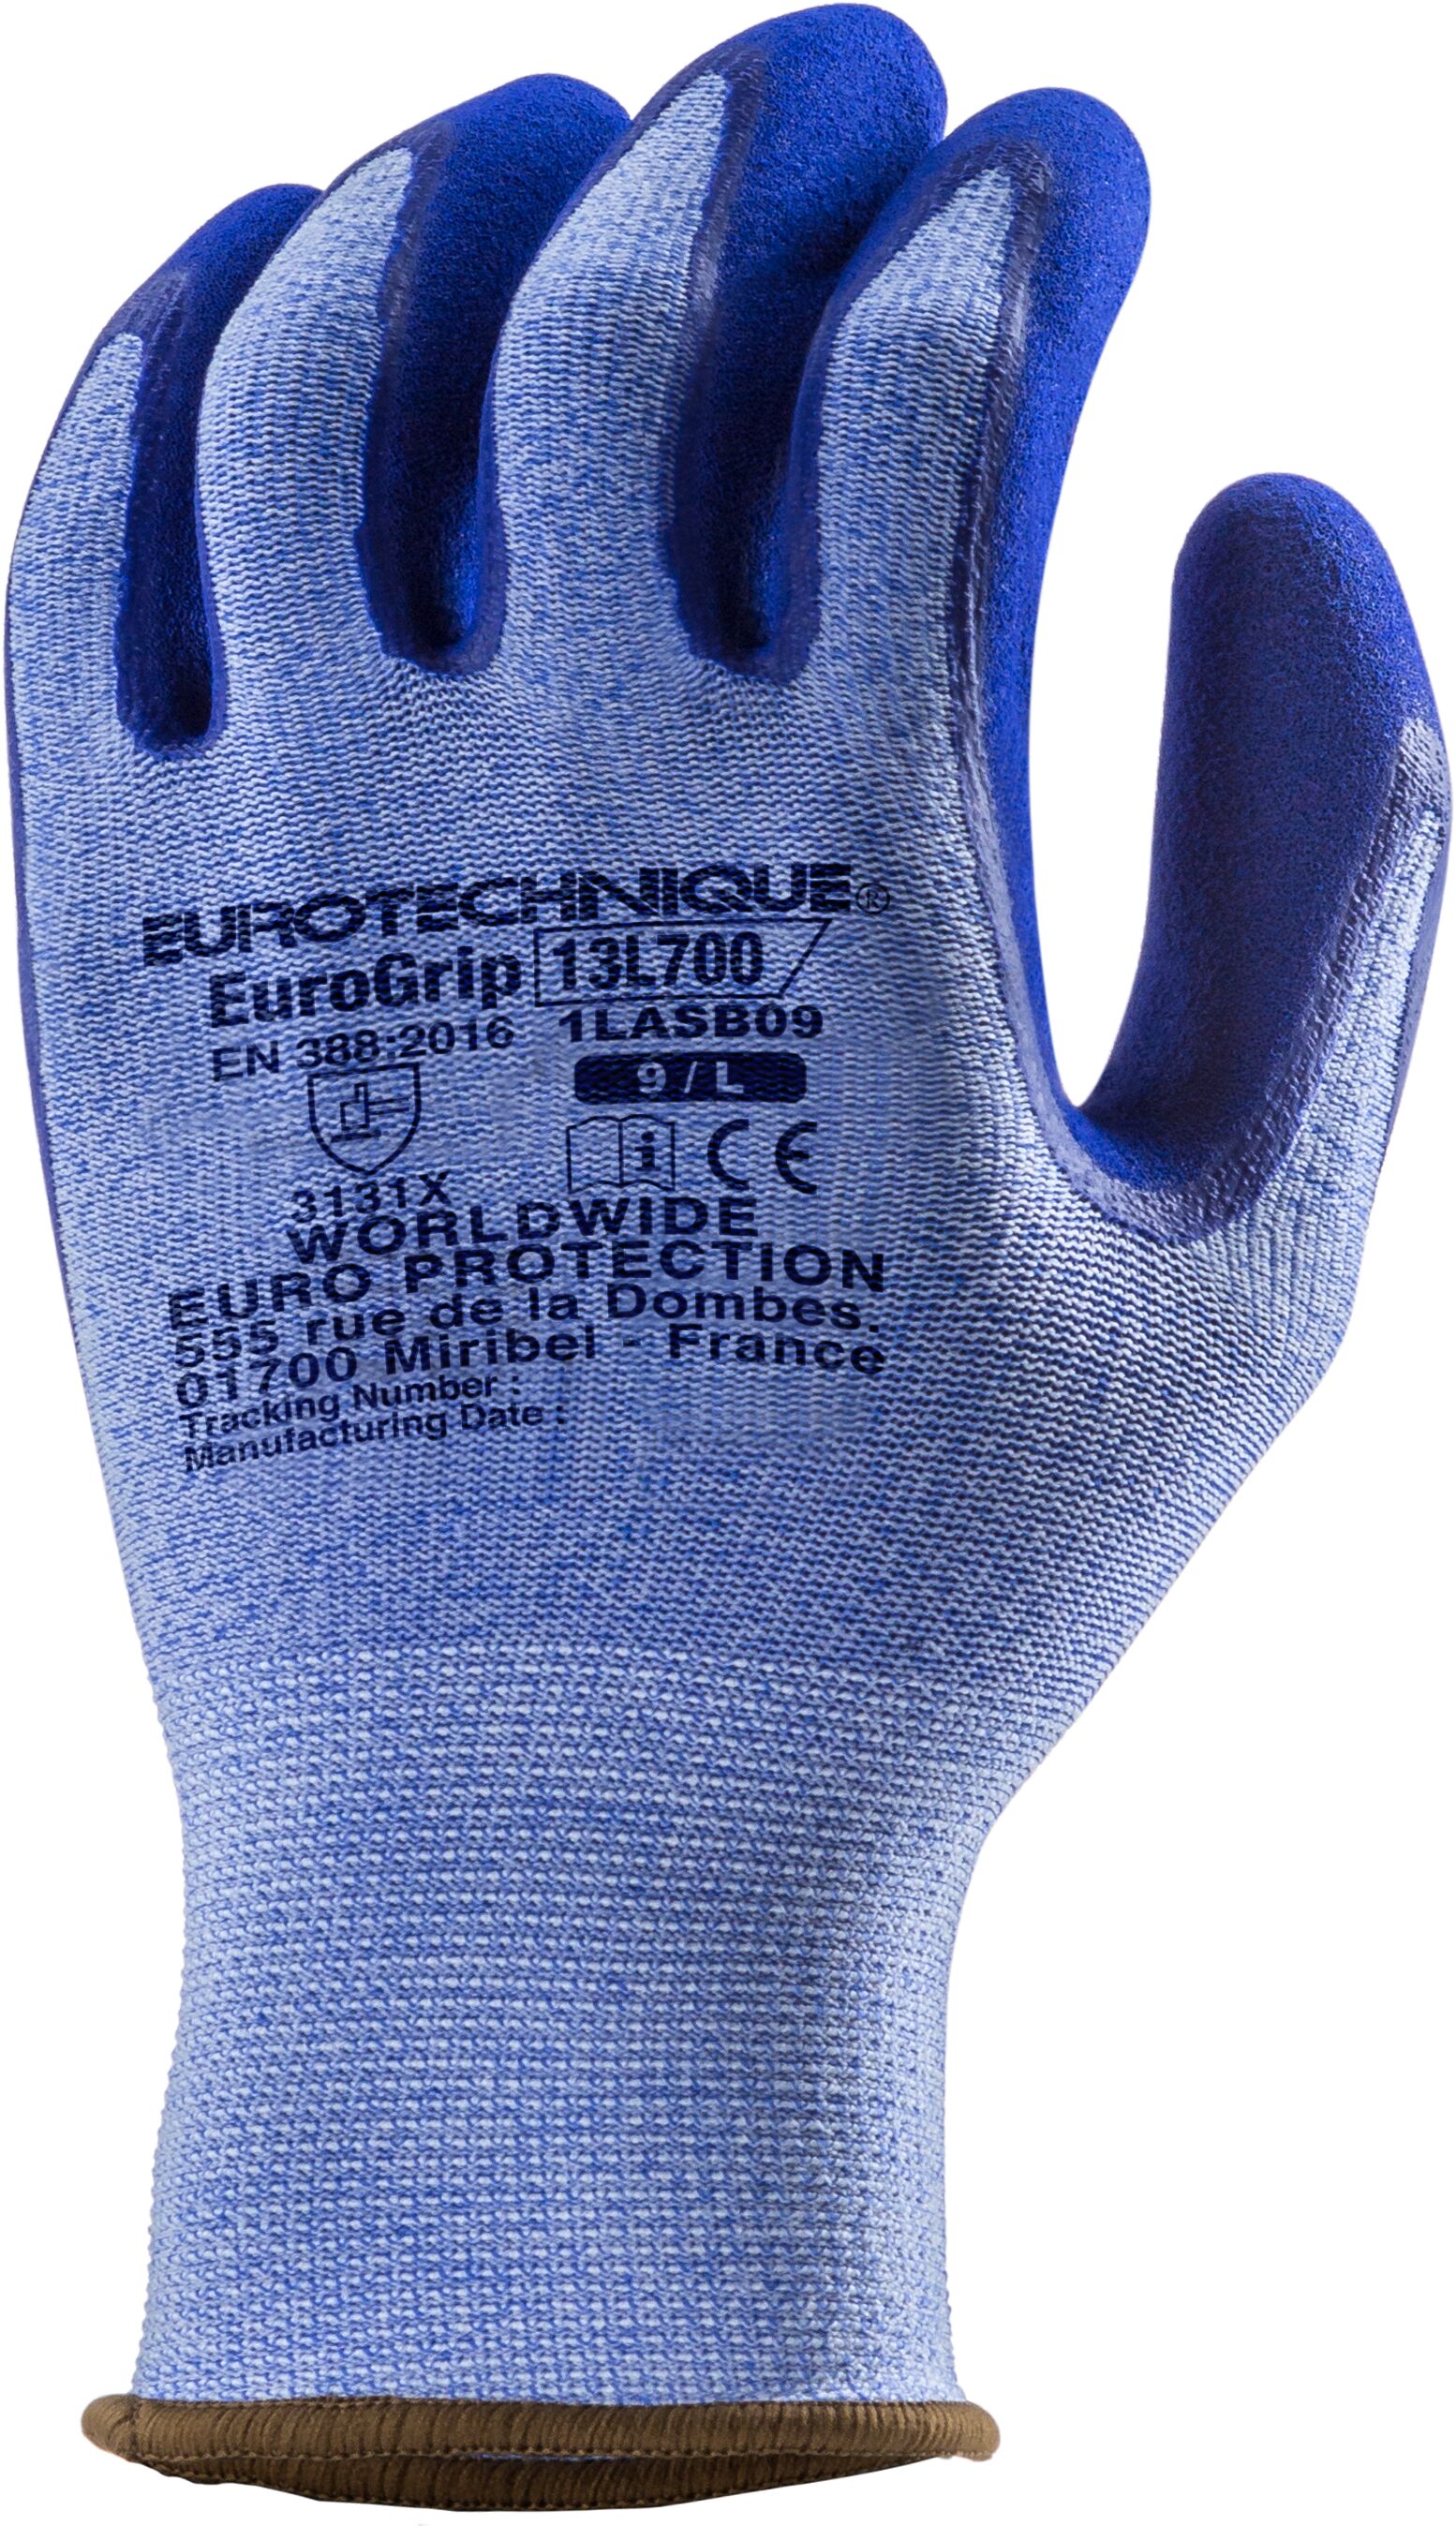 Gants manutention : homme, tactiles, taille 8